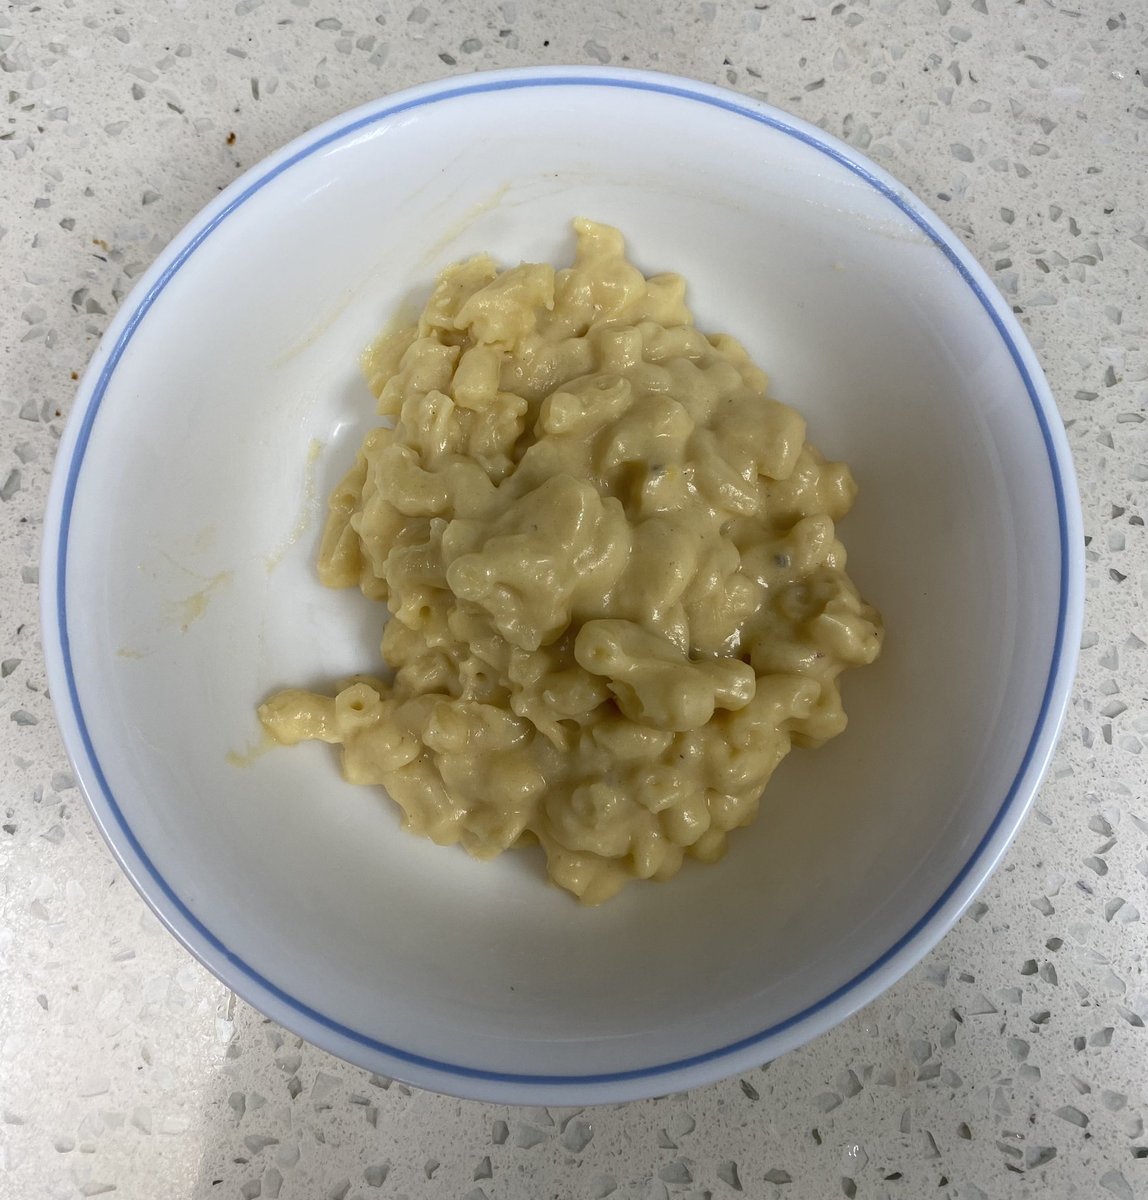 Macaroni And Cheese

#MacaroniAndCheese #MacAndCheese #Food #Cook #Cooking